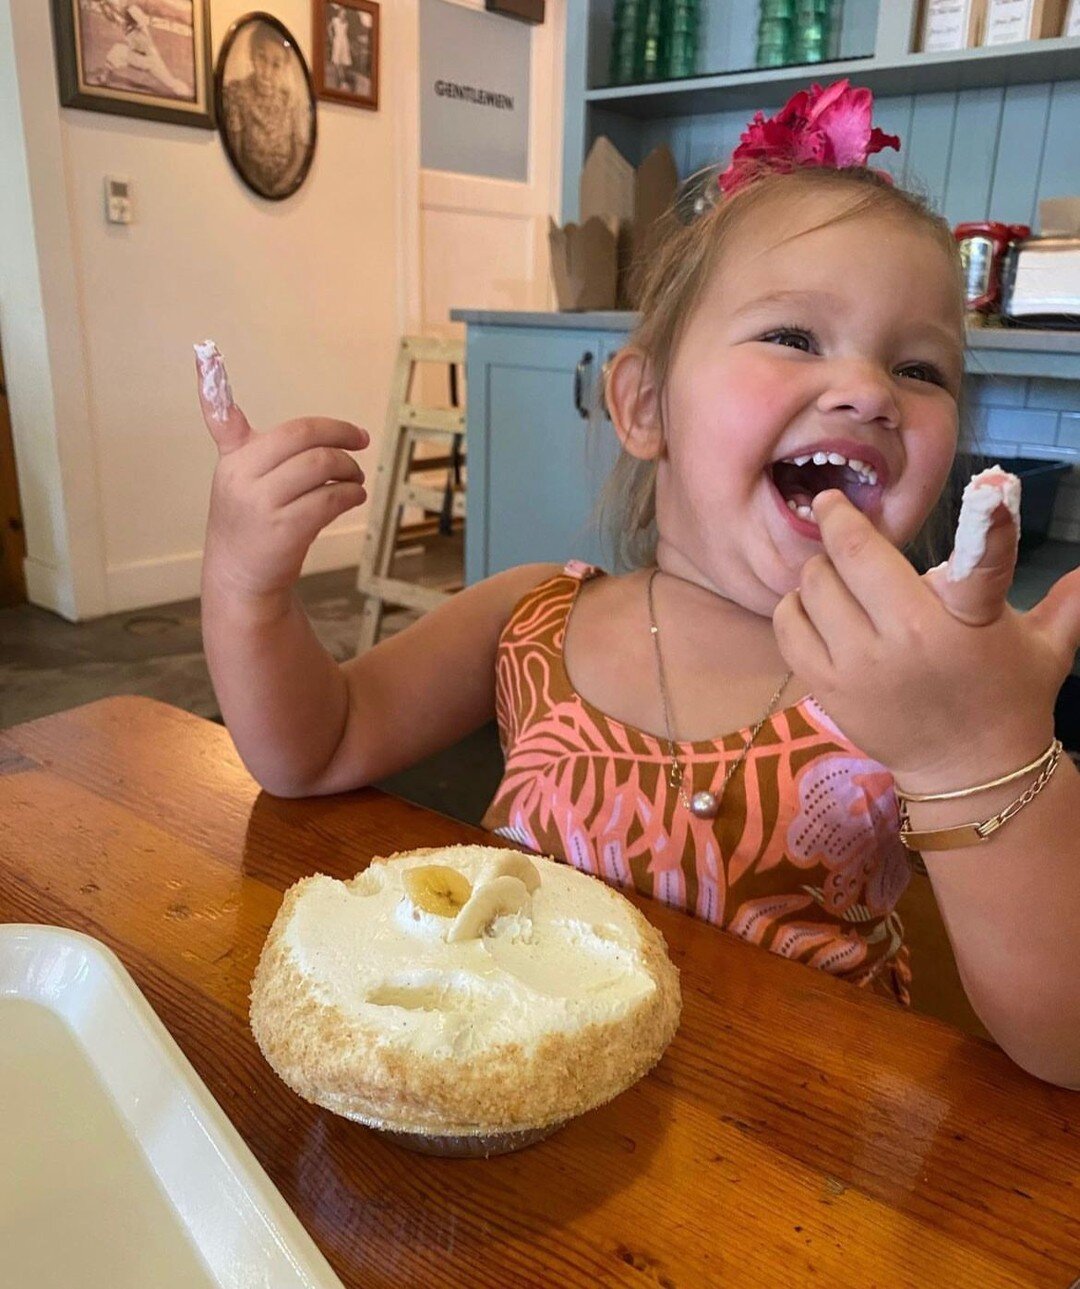 Pretty sure this sums up how we all feel about Banana Cream Pie! 🥰🍌

Thank you for the visit and the adorable pic @original_mama_berrr